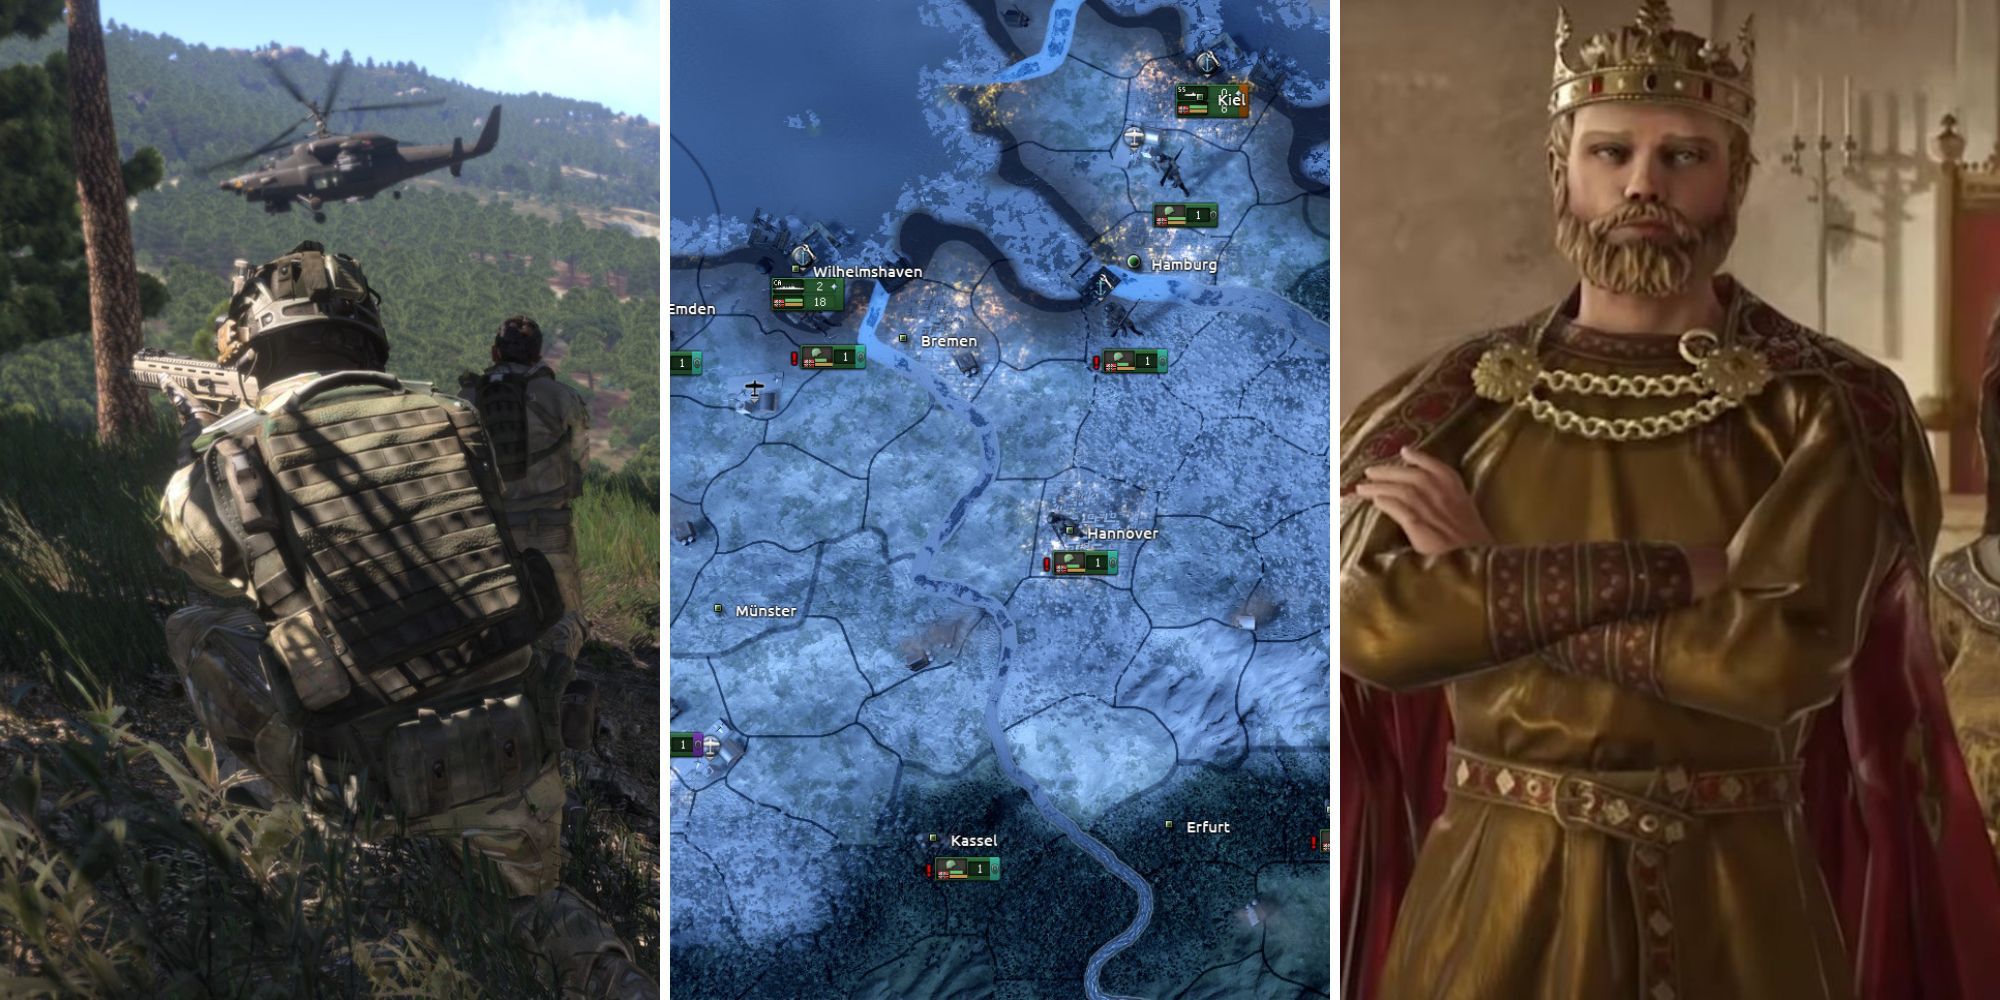 A grid showing the multiplayer games Arma 3, Hearts of Iron 4, and Crusader Kings 3